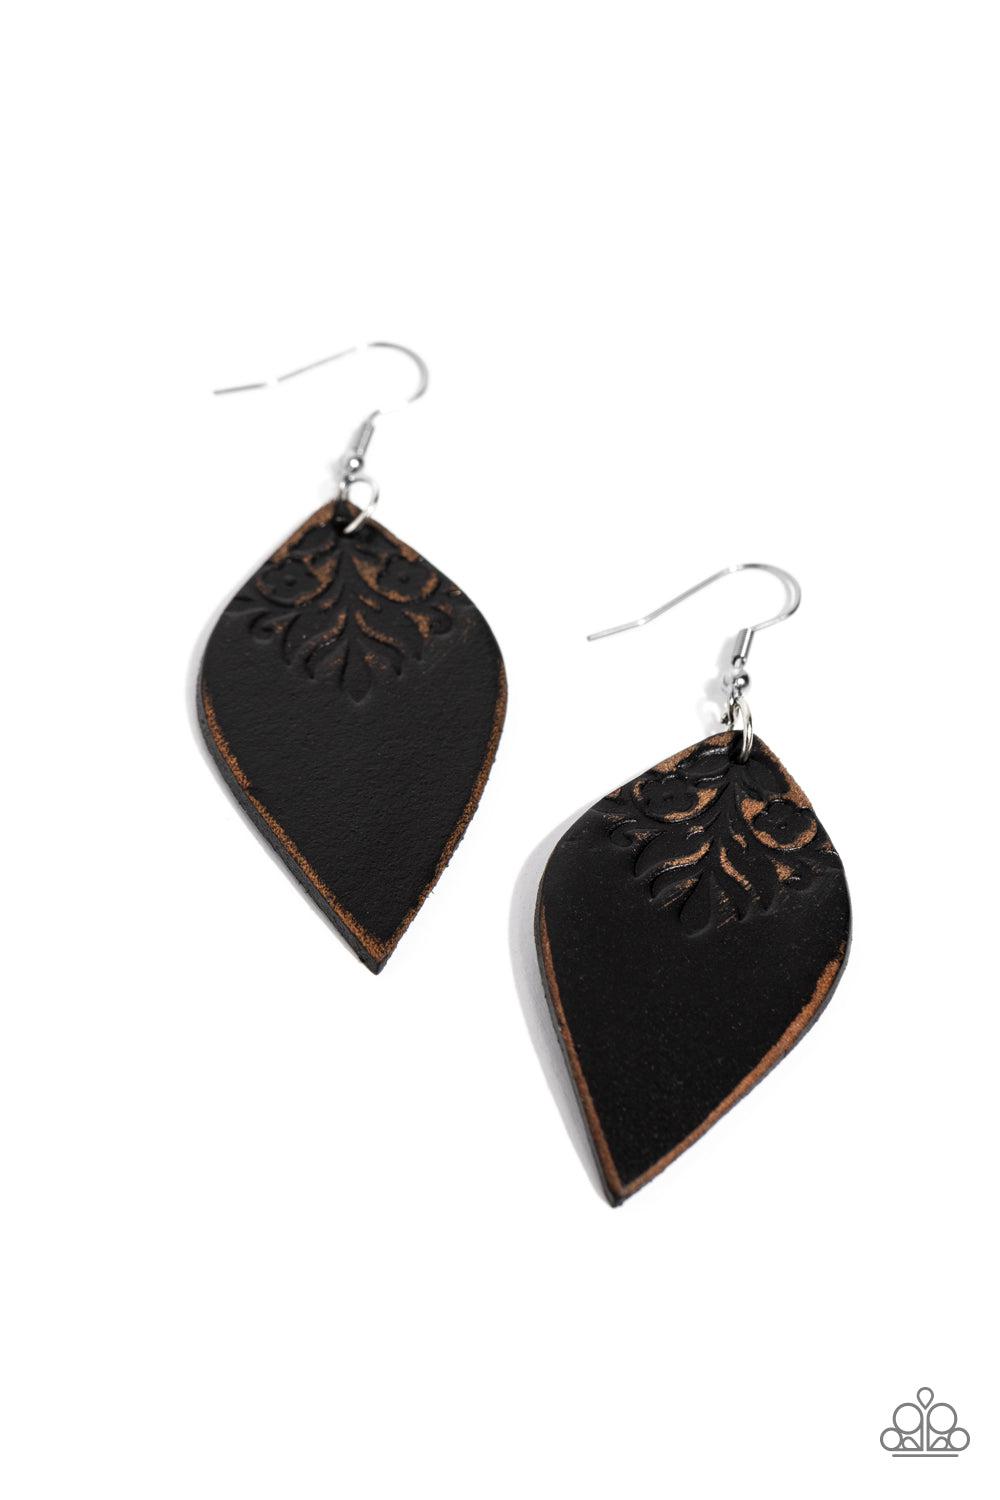 Naturally Nostalgic Black Leather Earrings - Paparazzi Accessories- lightbox - CarasShop.com - $5 Jewelry by Cara Jewels